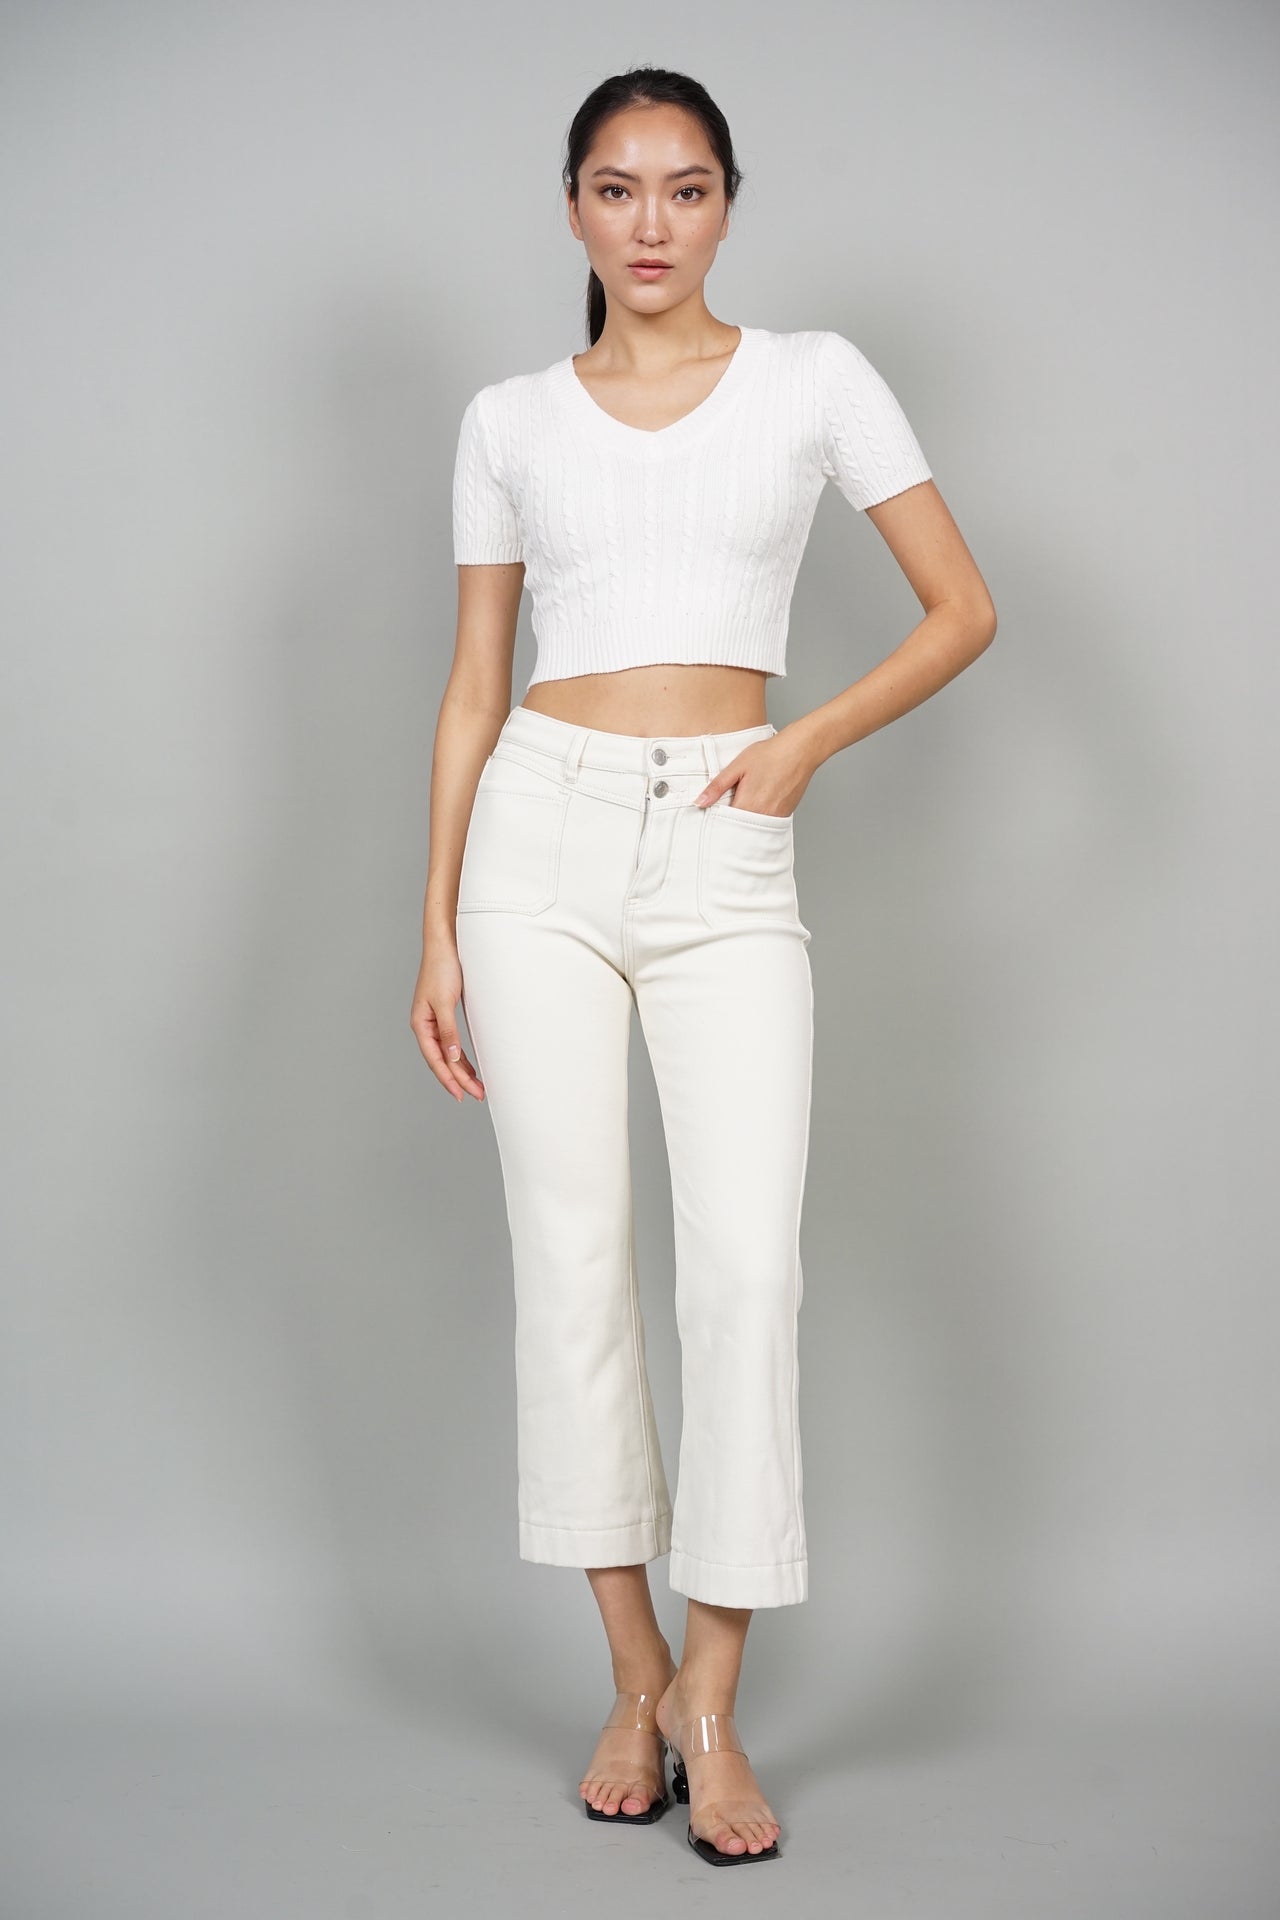 EVERYDAY / Jade Top in White